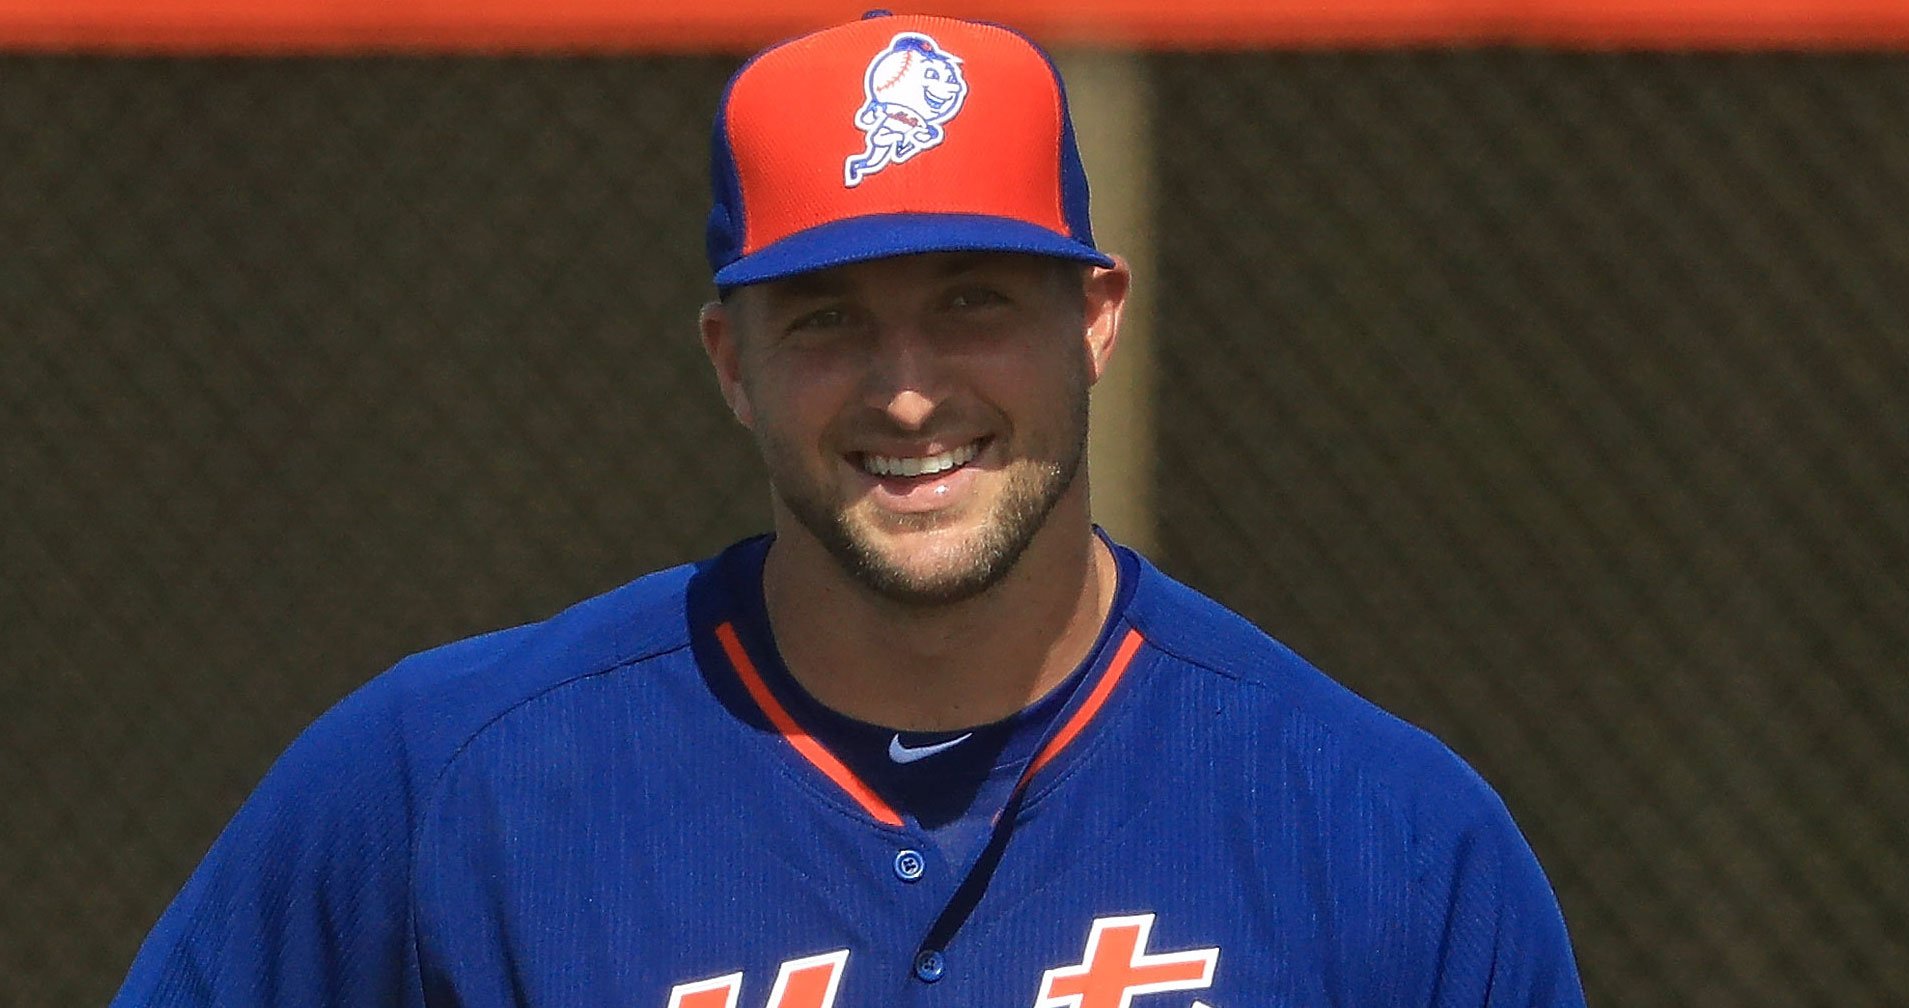 Tim Tebow Hits Home Run on First Pitch of Pro Baseball Career